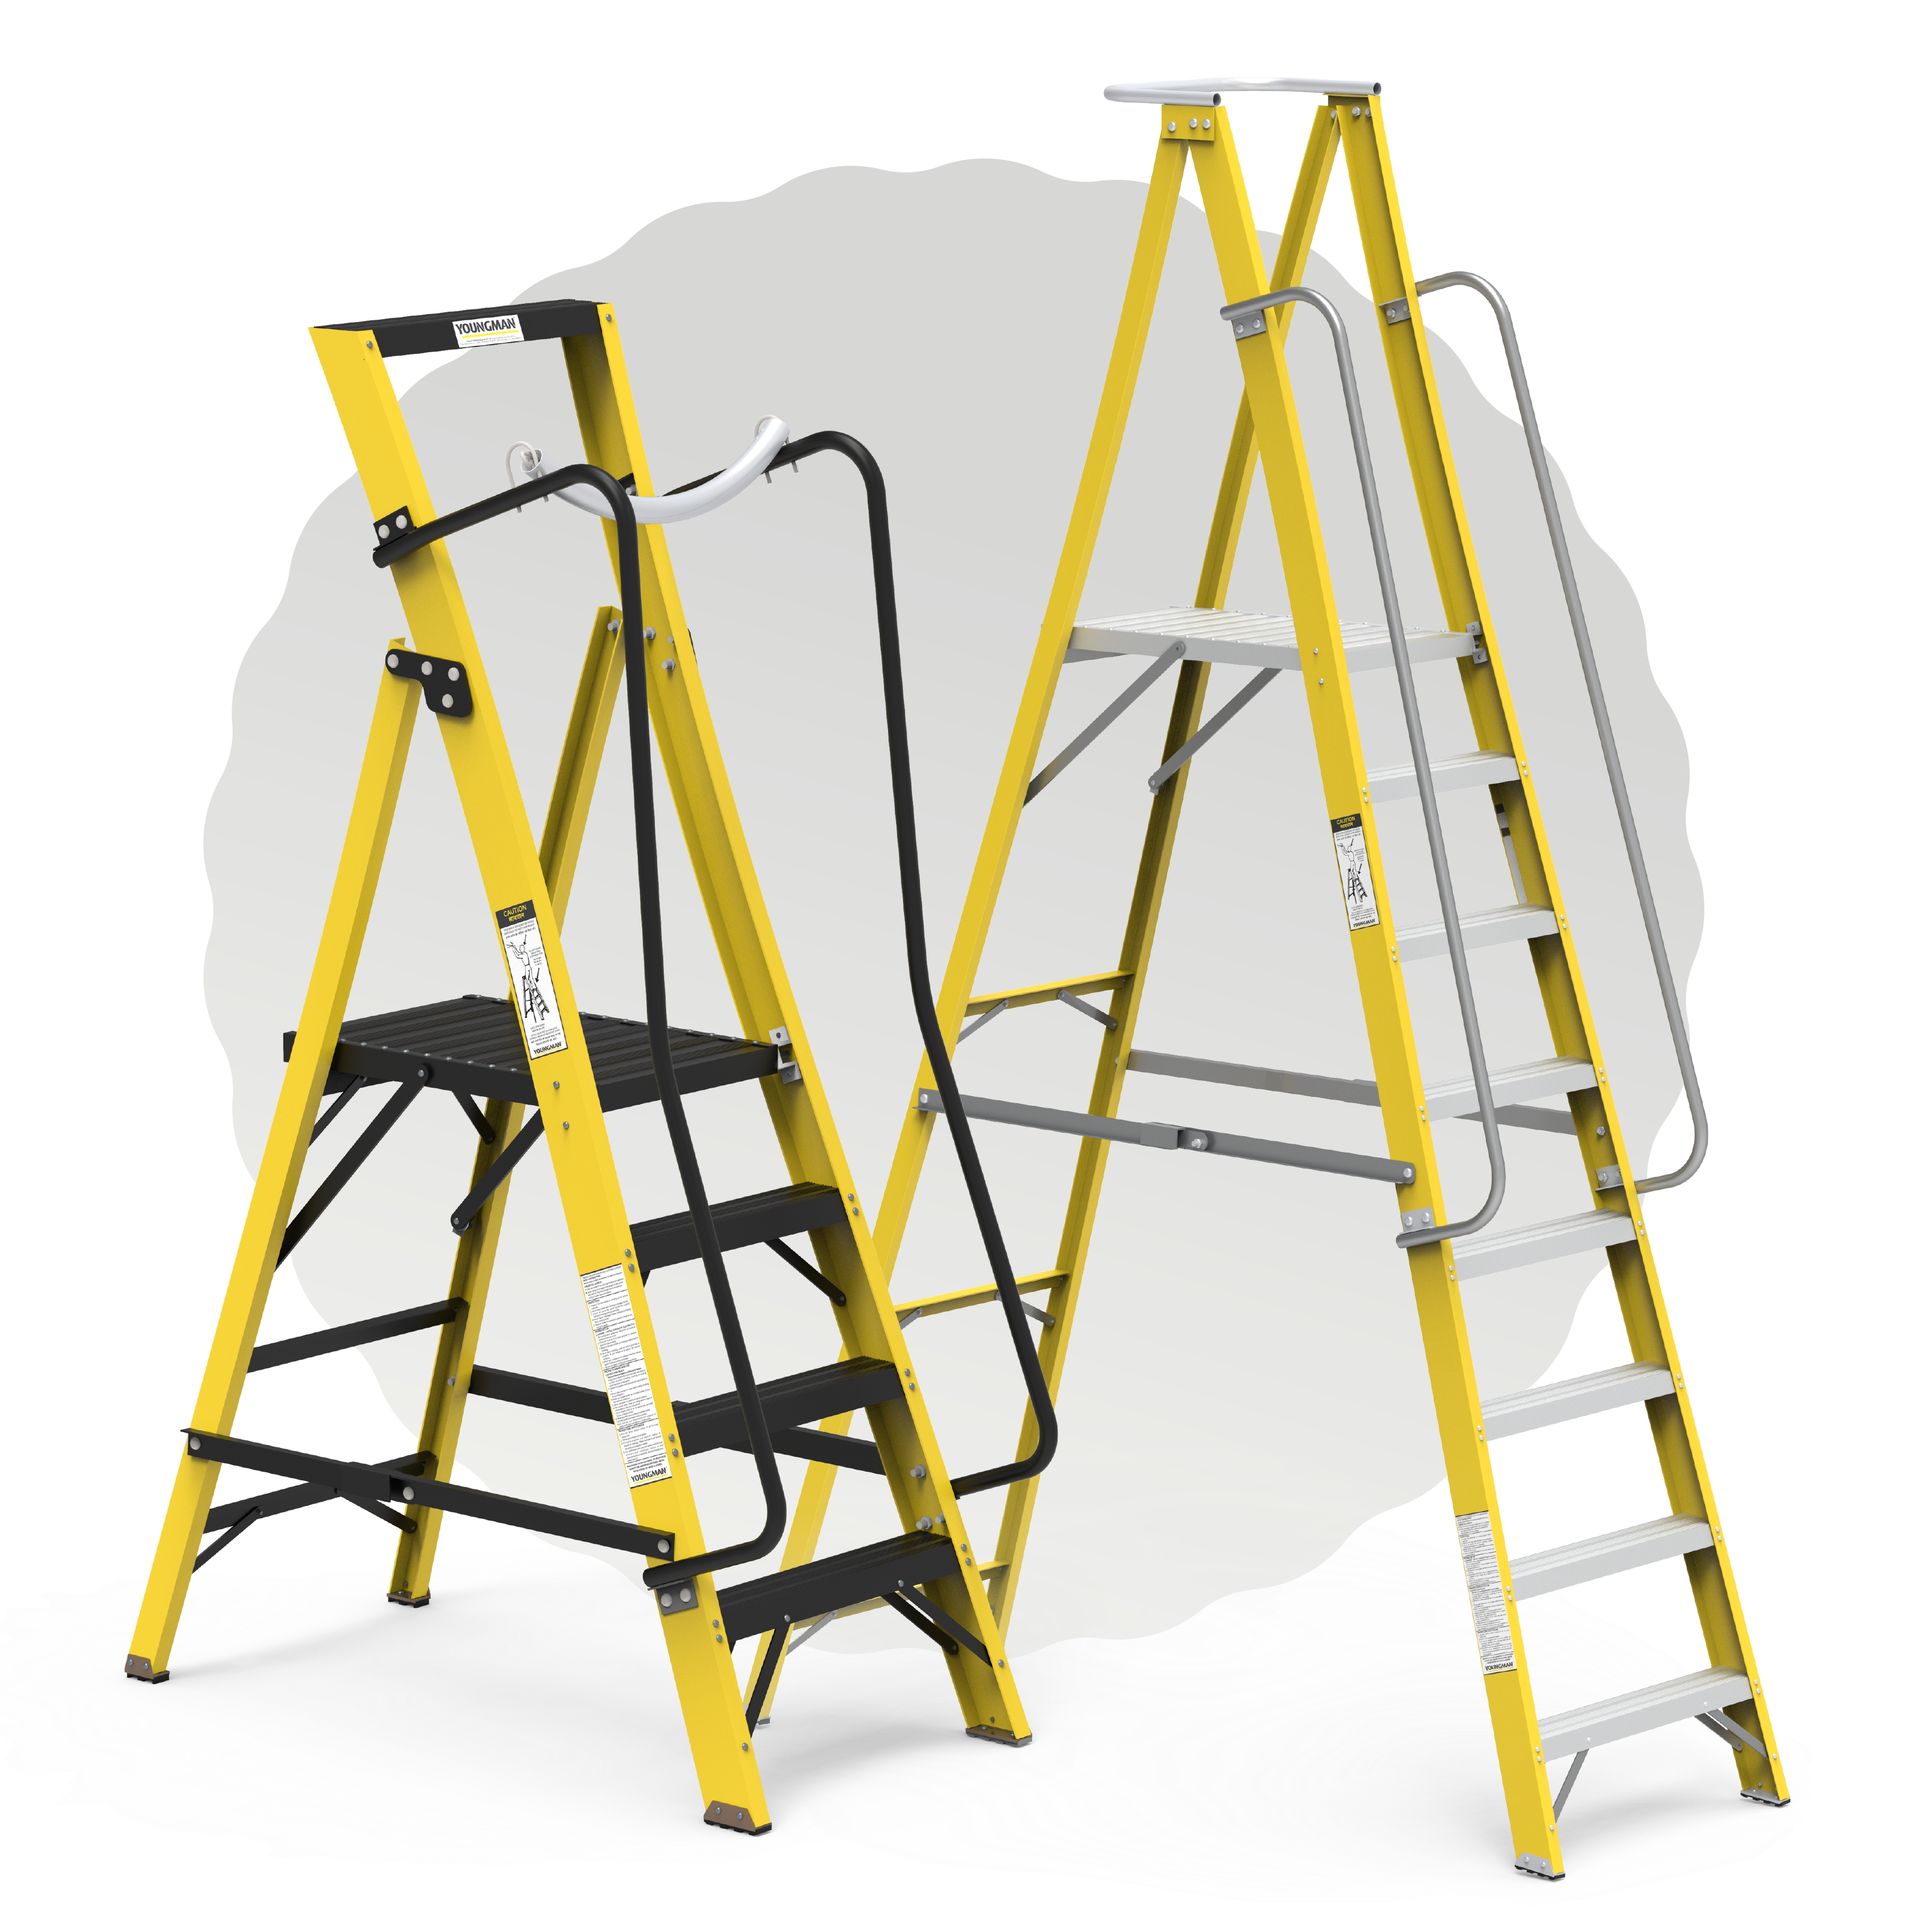 Youngman Manufacturing: India's #1 Ladders, Scaffolds & Work Platform